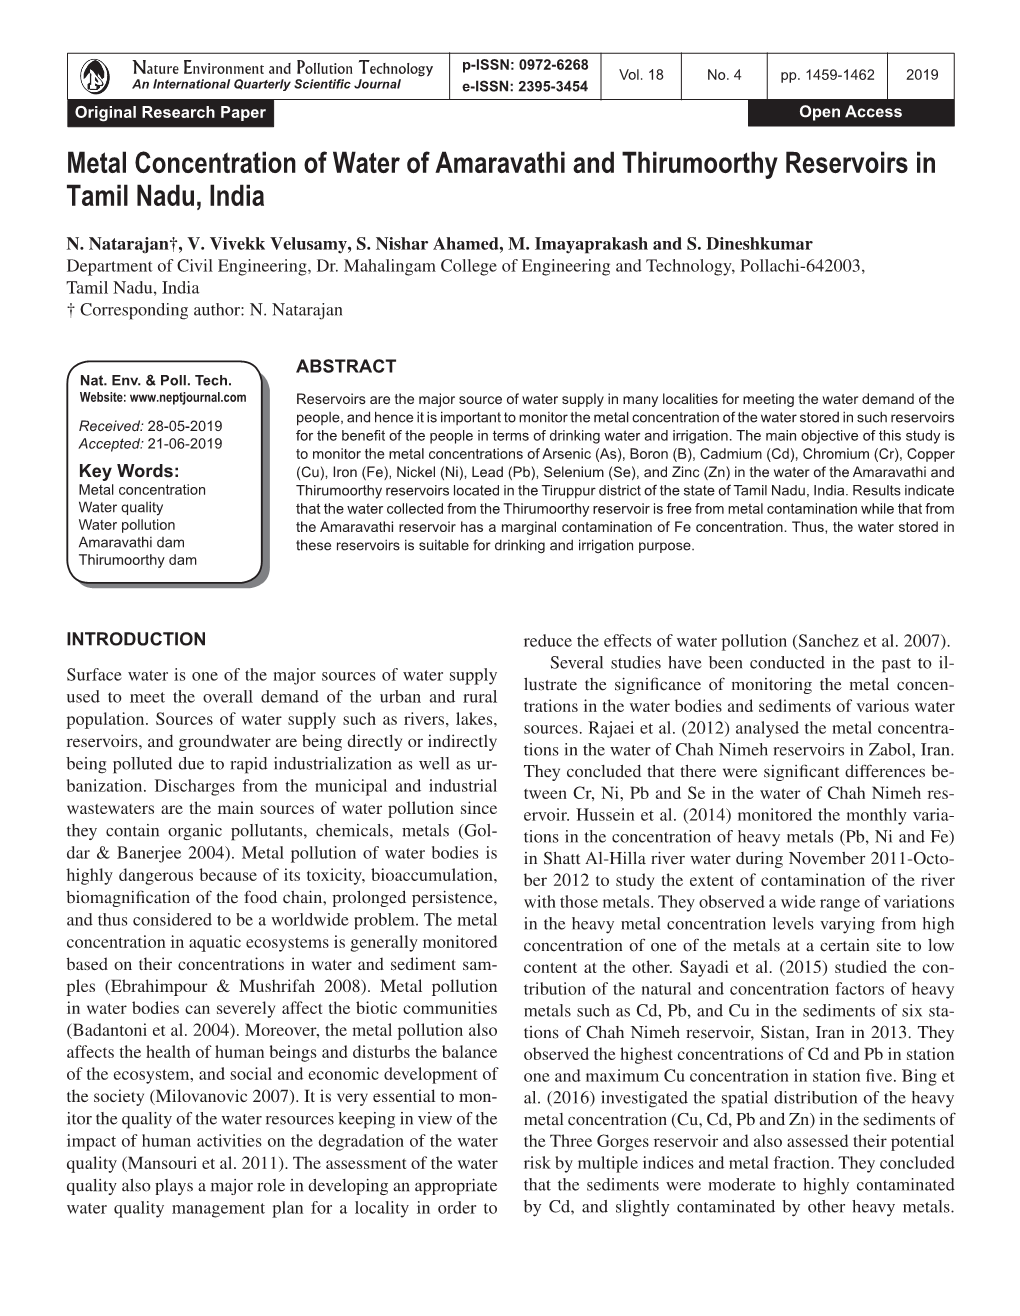 Metal Concentration of Water of Amaravathi and Thirumoorthy Reservoirs in Tamil Nadu, India